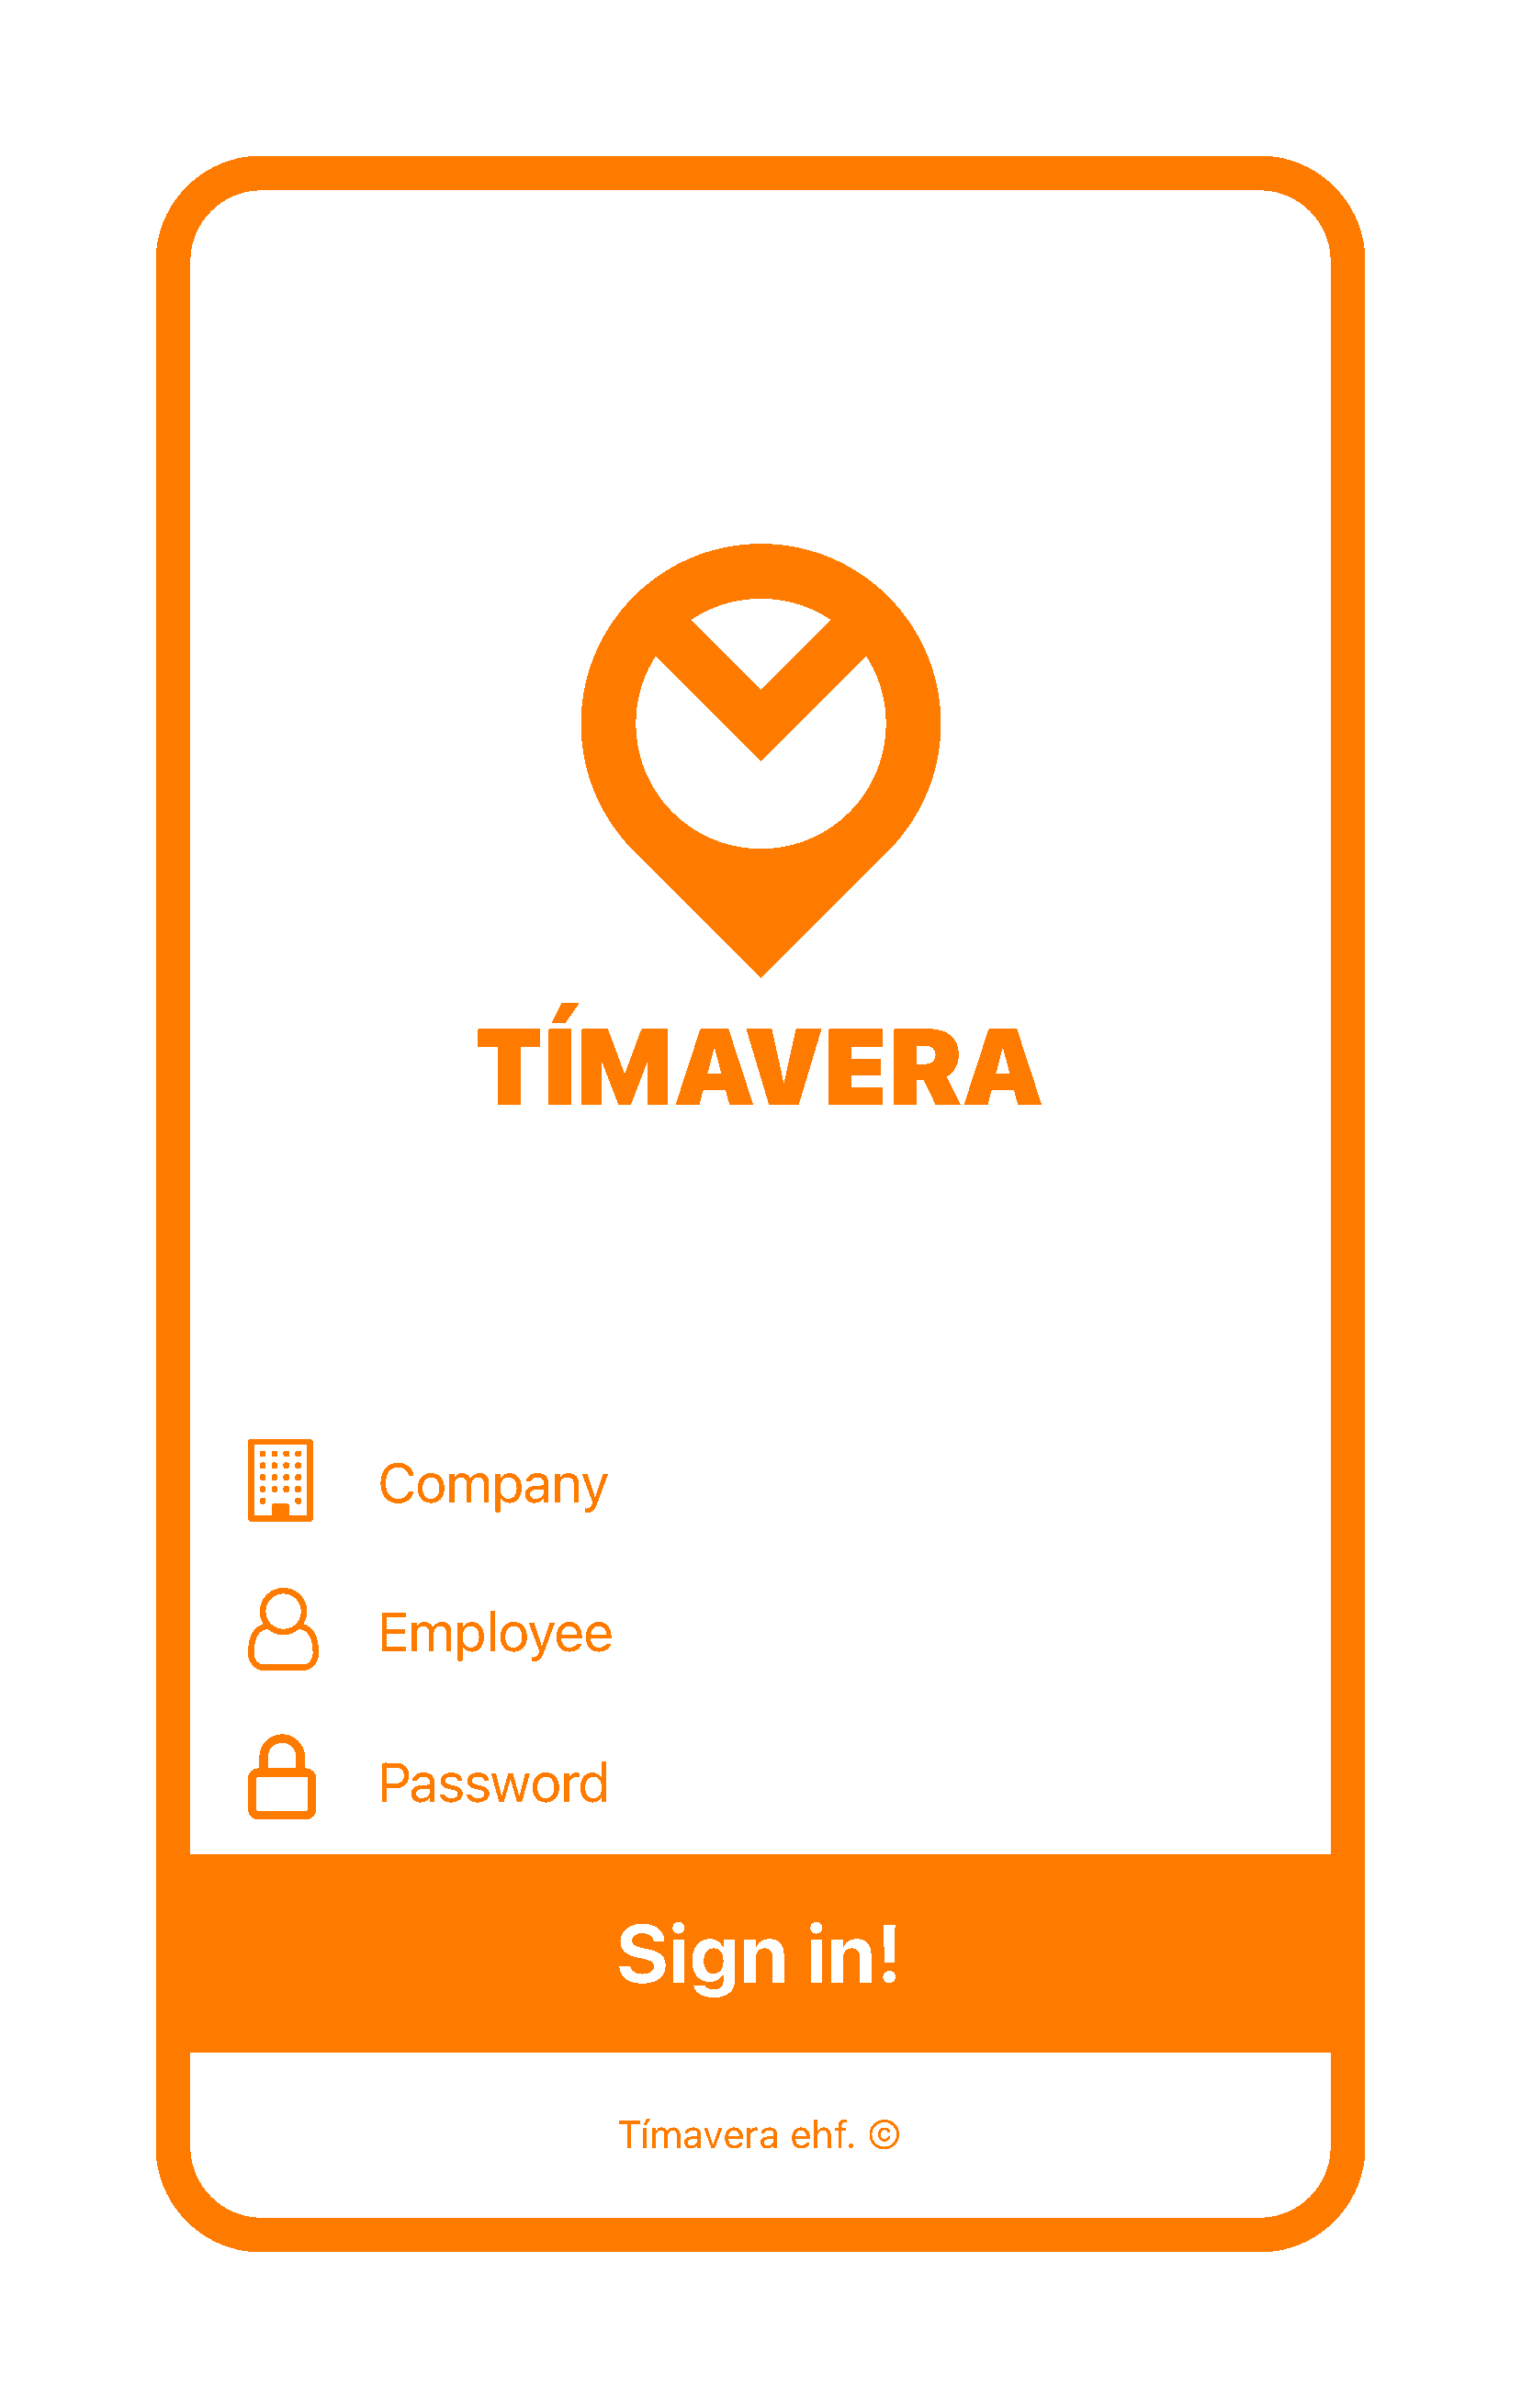 Tímavera mobile app on the login screen. Inputs: company, employee name, and password.